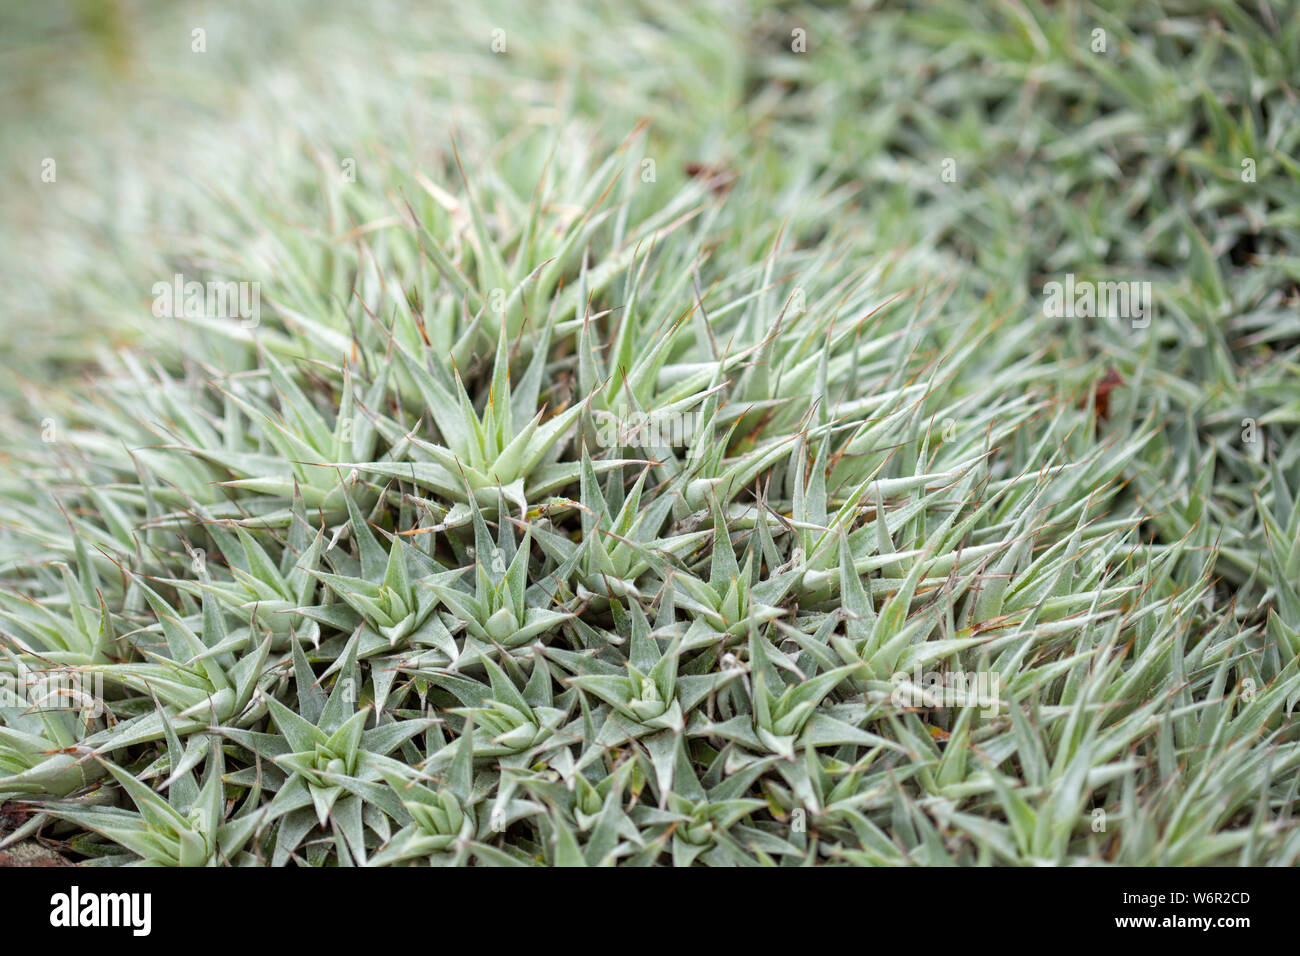 Natural background of sharp leaves of Deuterocohnia brevifolia Stock Photo